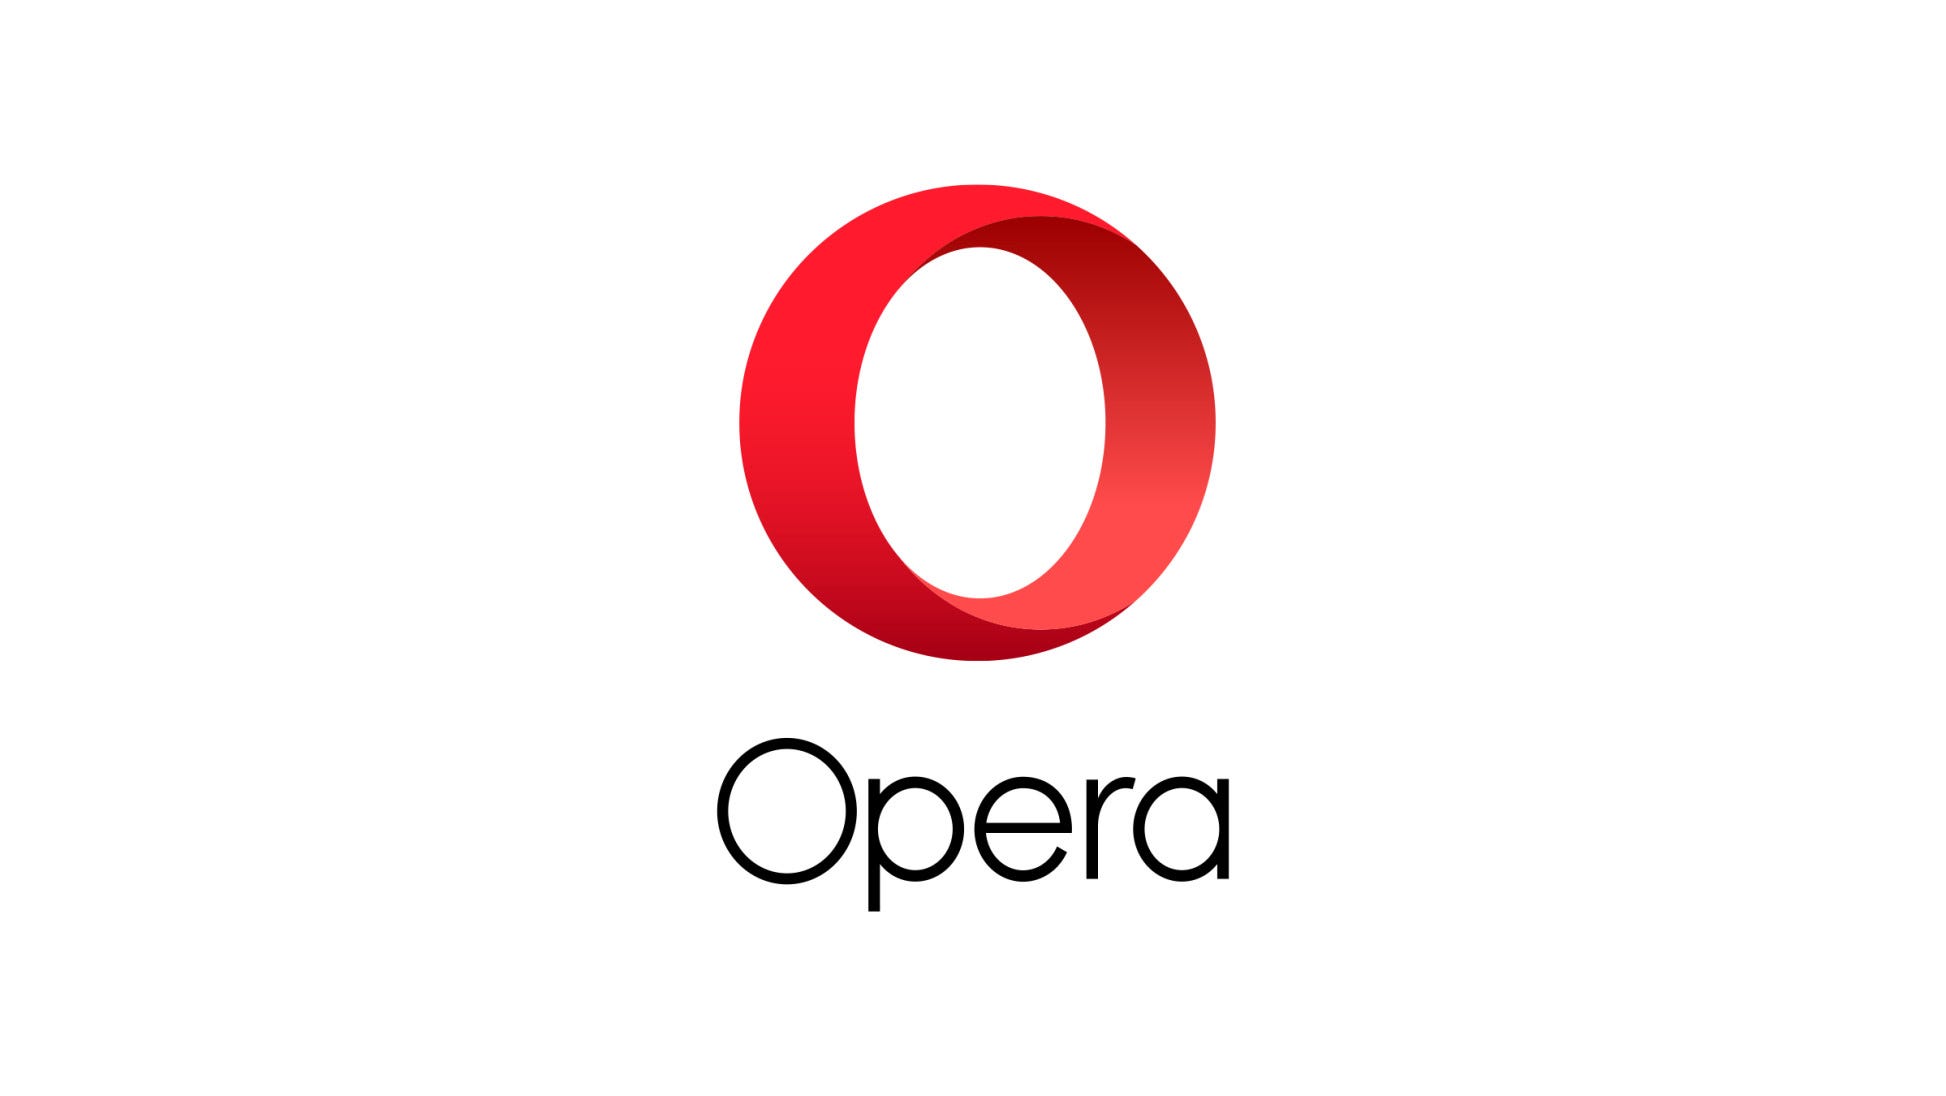 Opera GX's new browser AI wants to answer all your videogame questions